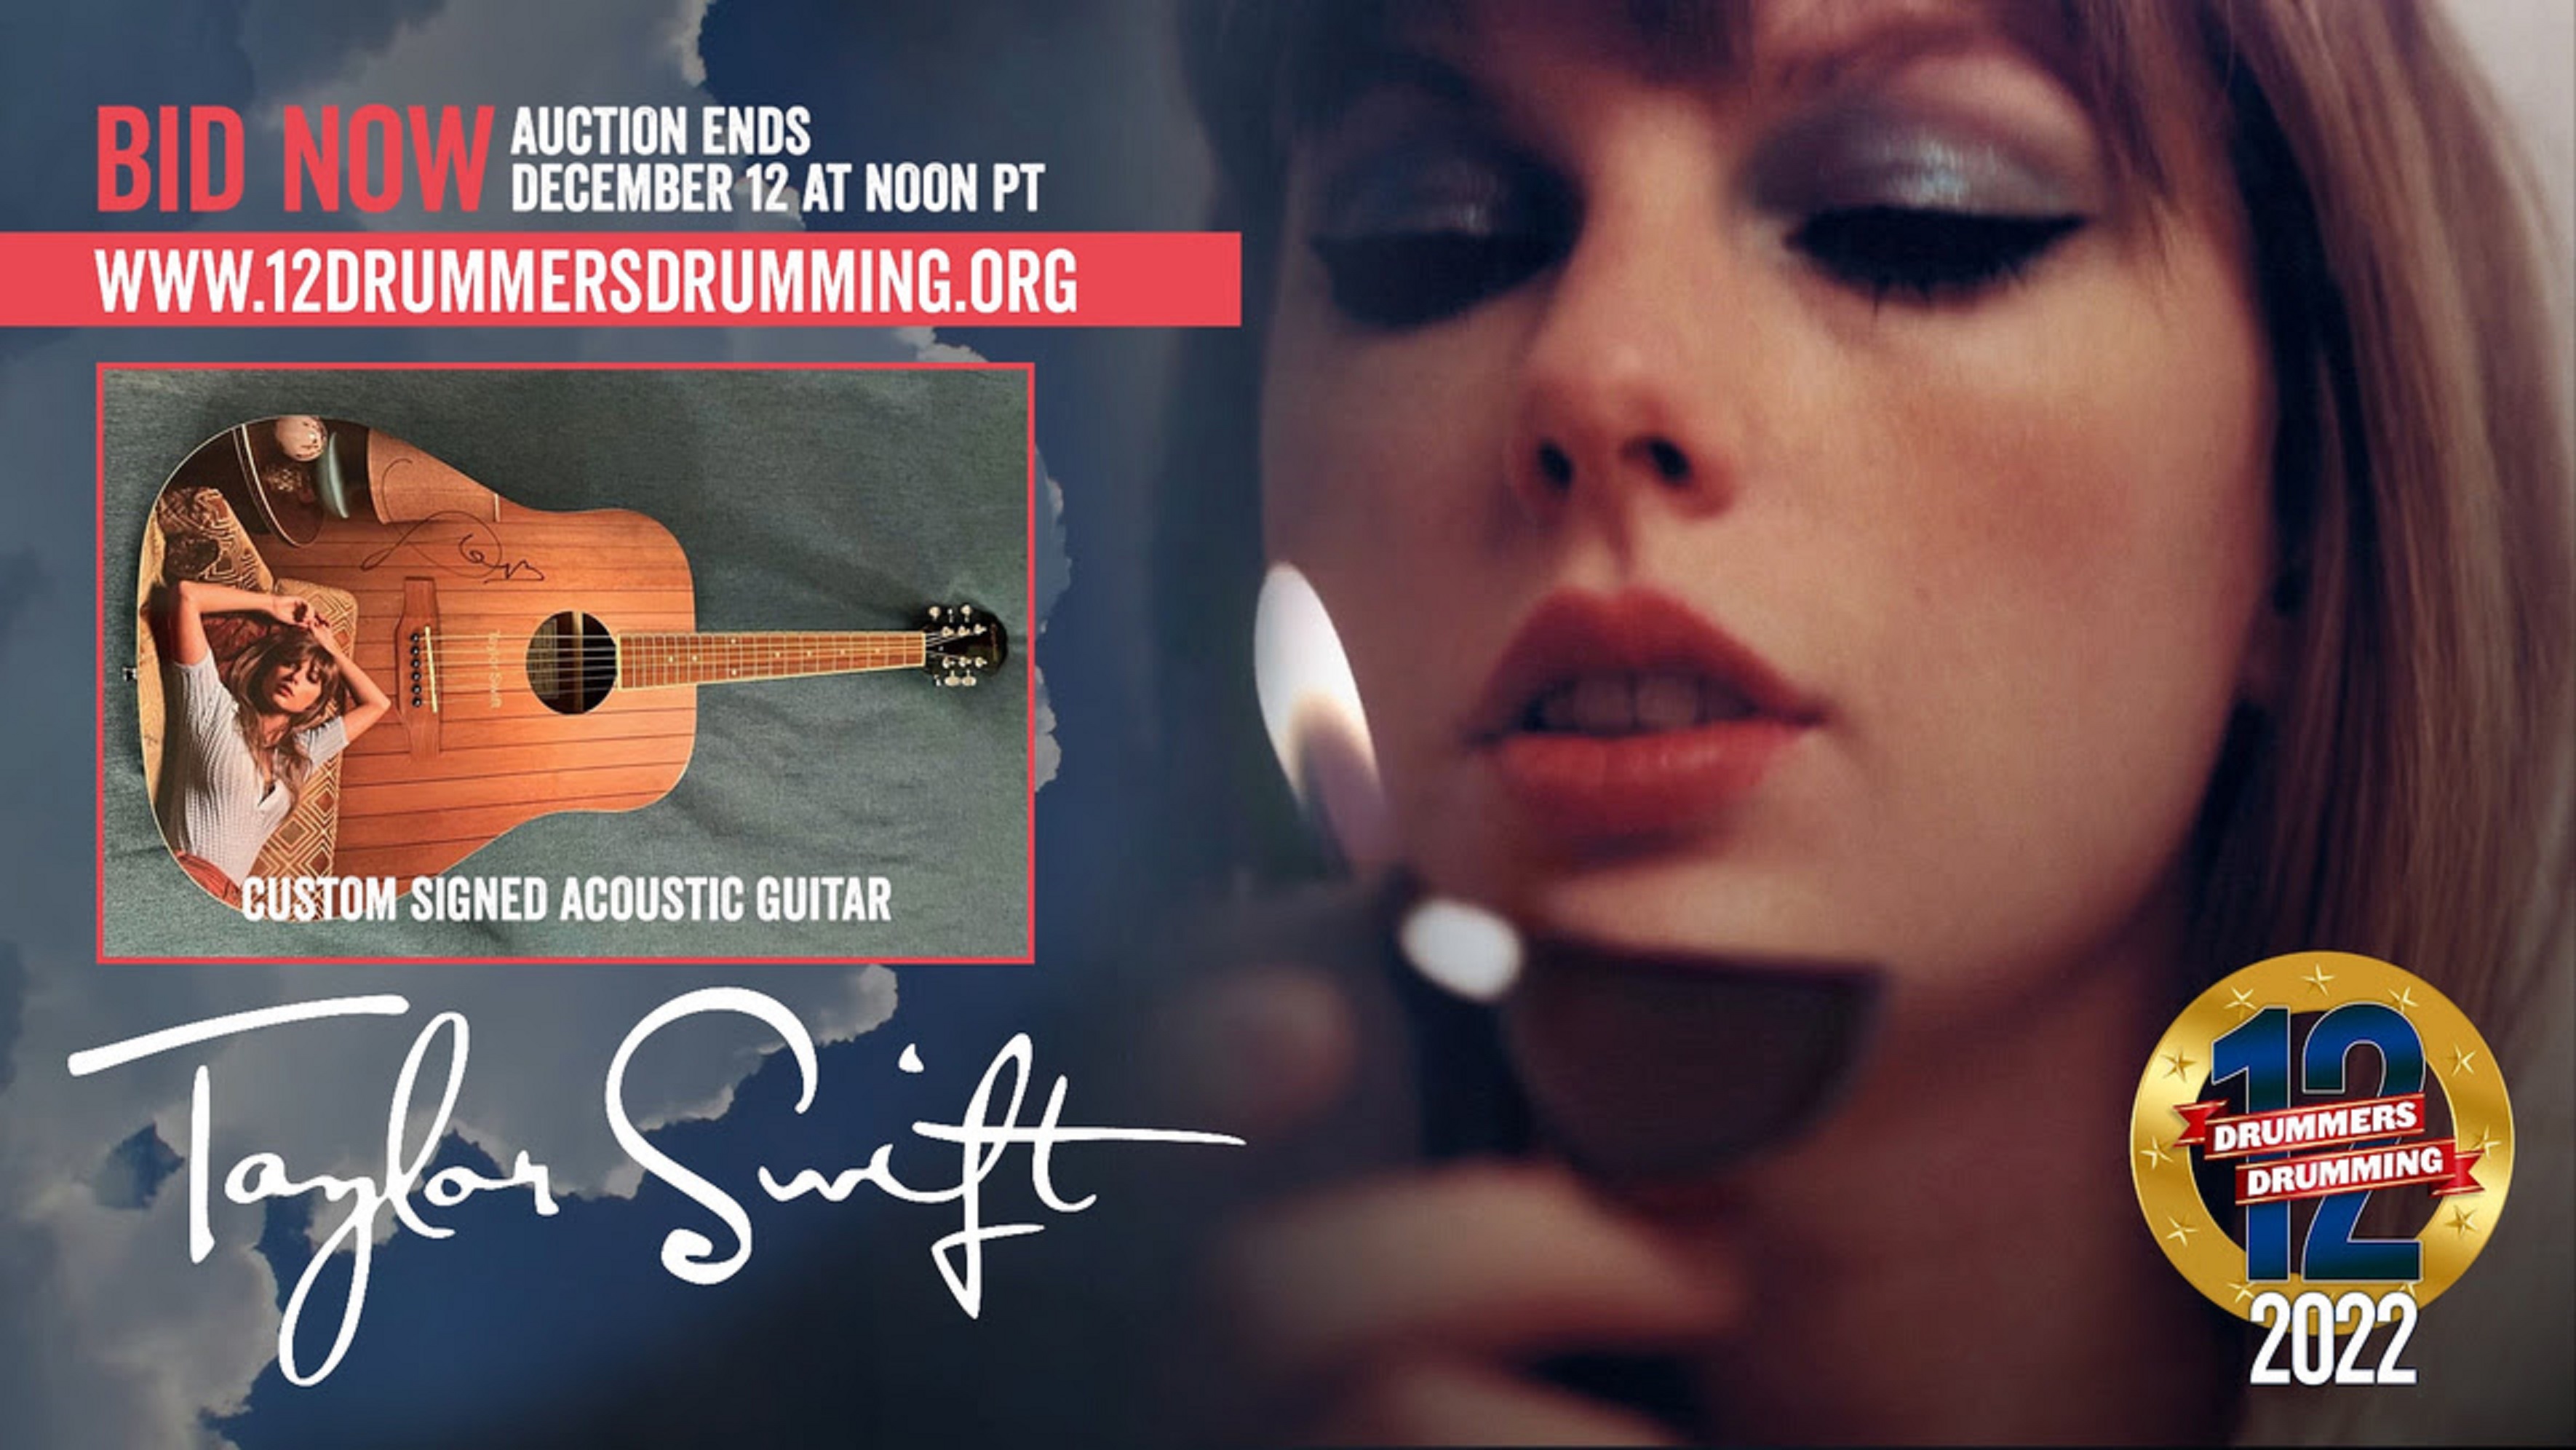 Guitar signed by Taylor Swift added to auction for Veterans and First Responders